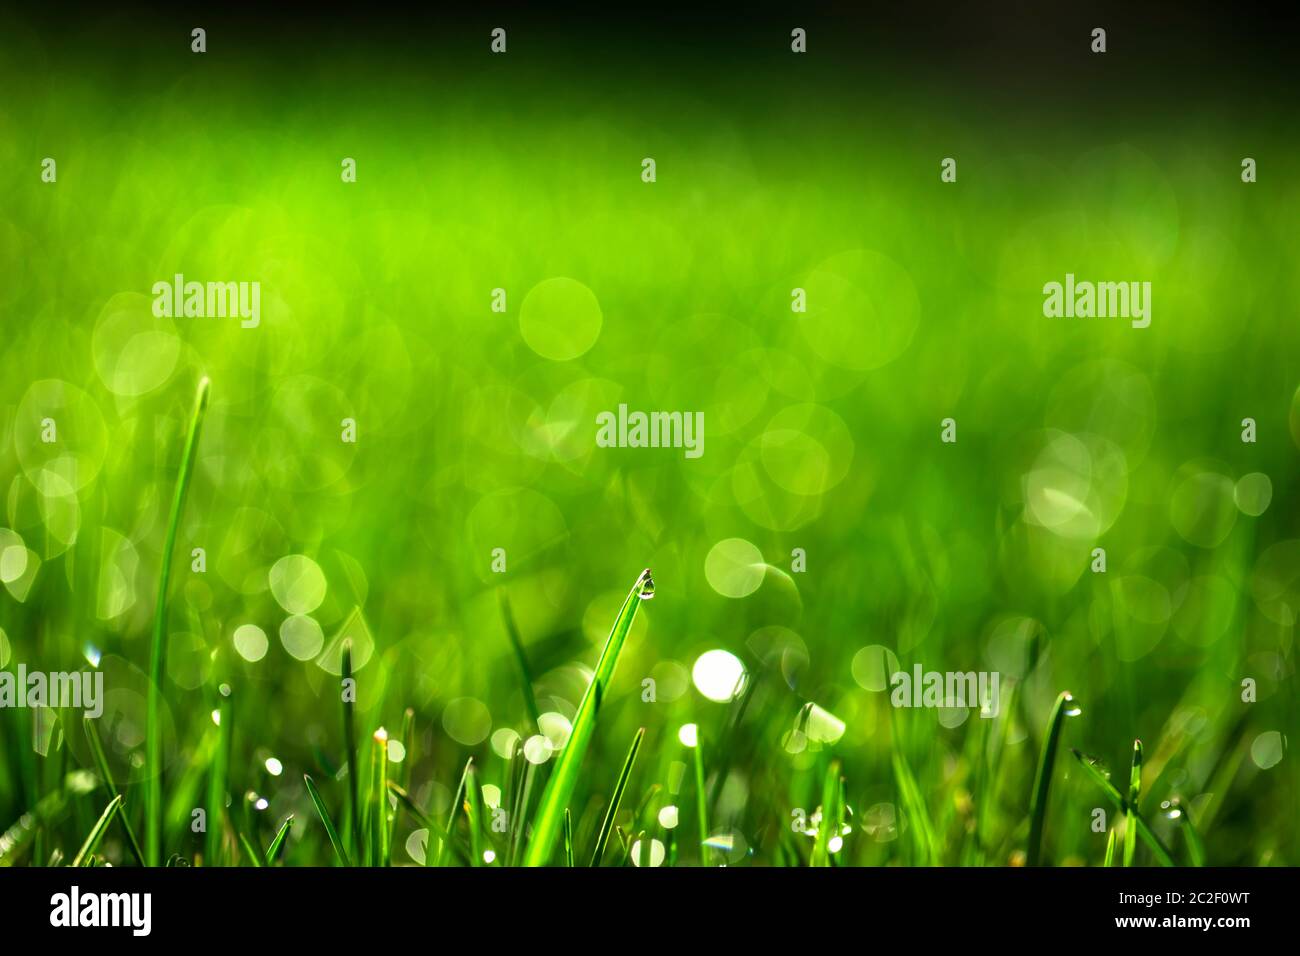 Green grass with waterdrops Stock Photo